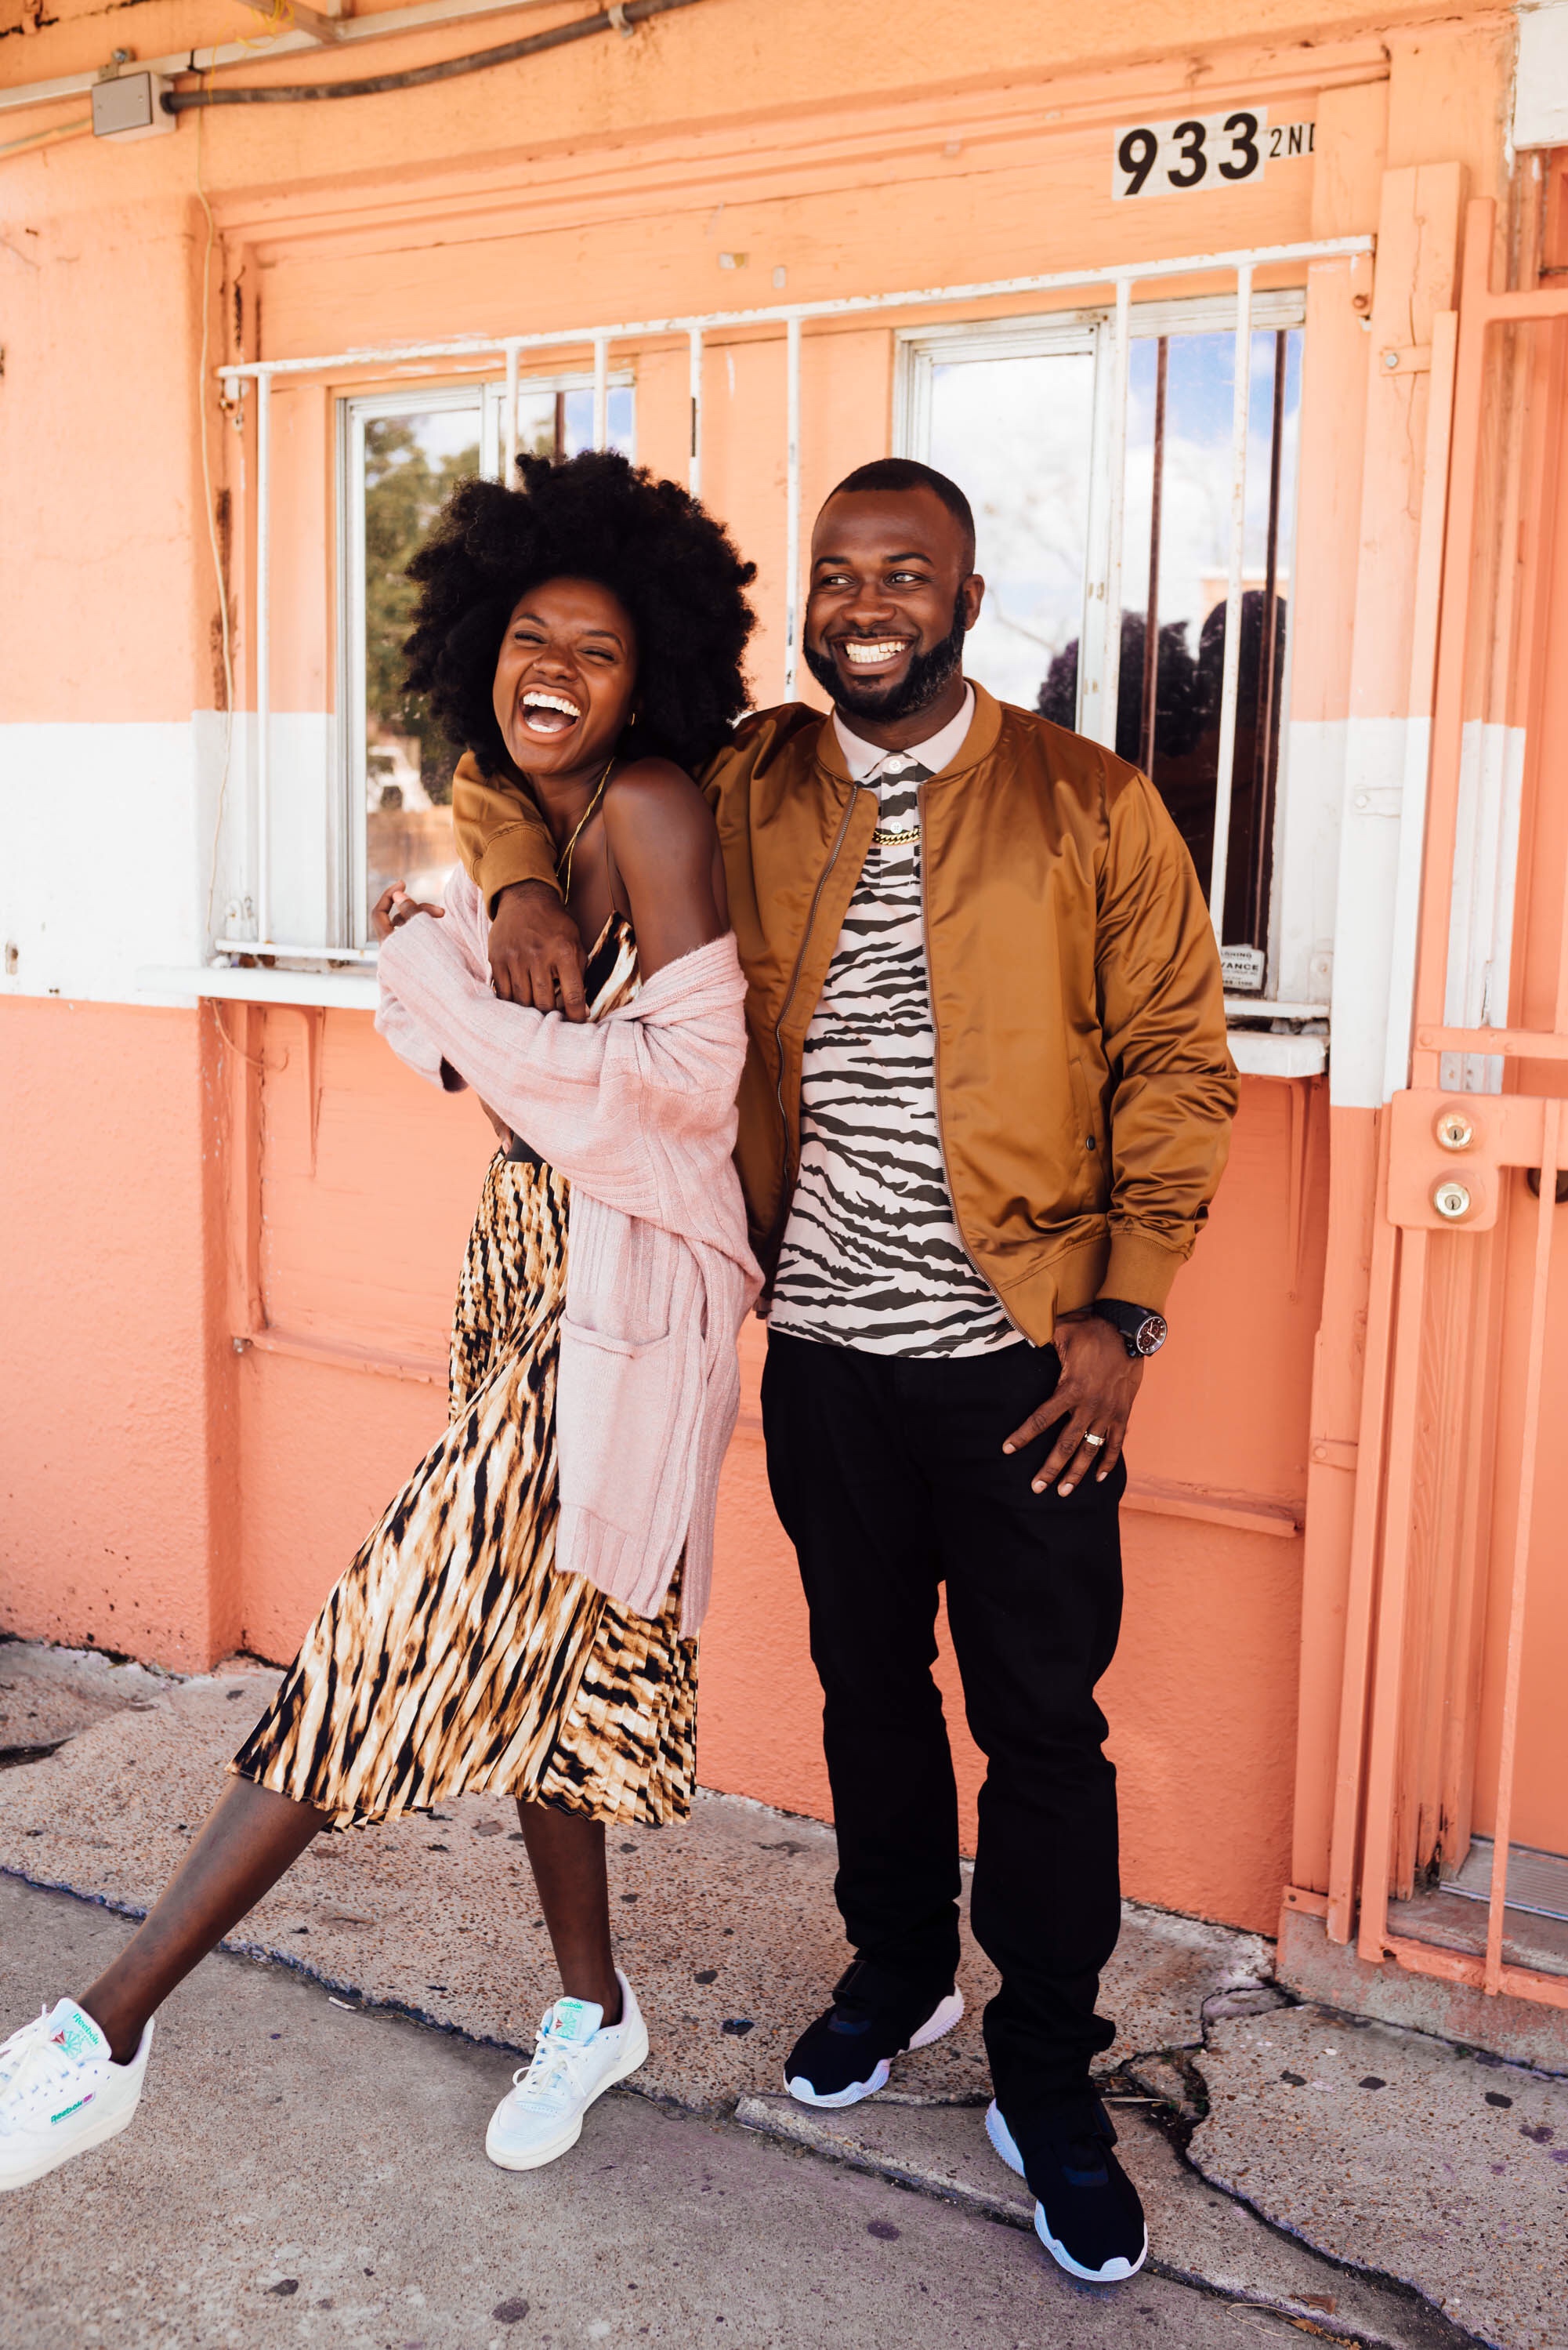 mens fall fashion, nordstroms mens wear, salt and pepper beard, tiger pique polo, tiger camisole, tiger skirt, brother and sister photos, houston bloggers, black houston blogger, black fashion blogger, 4b afro, 4b hair, 4c hair, 4c afro, natural hair afro